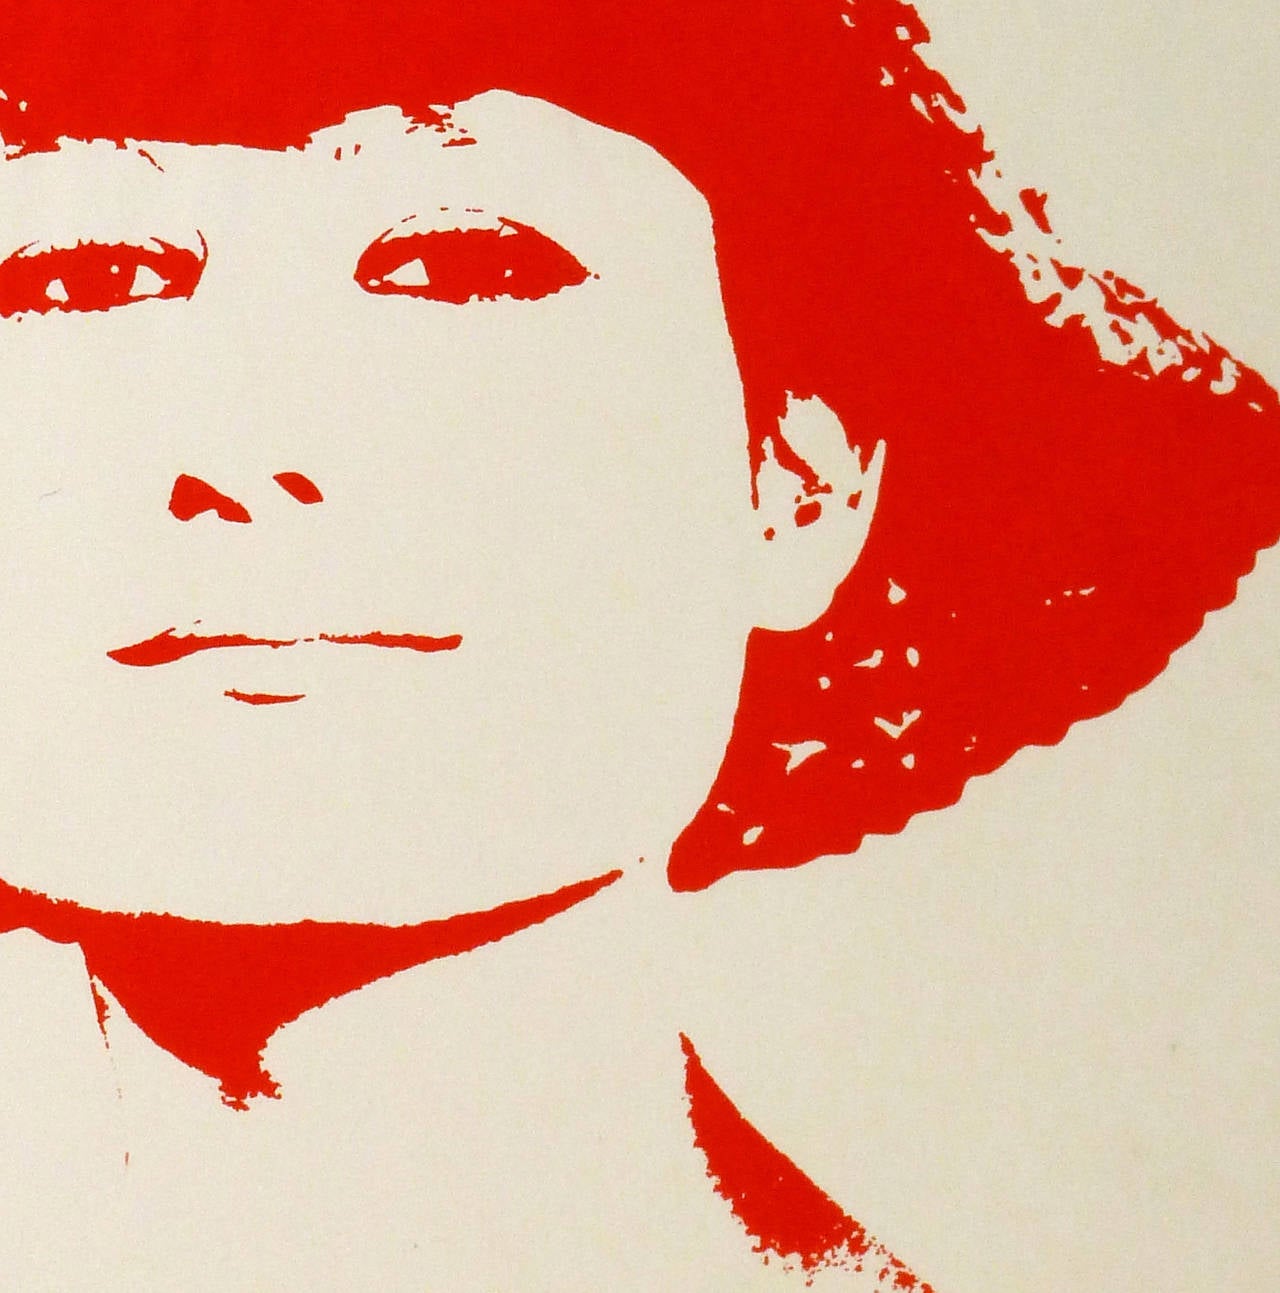 Vintage serigraph of a Audrey Hepburn woman in a hat with a vibrant red by artist Dieter Bortfeldt (1940-2014), circa 1970. Unsigned.

Original one-of-a-kind artwork on paper displayed on a white mat with a gold border. Mat fits a standard-size